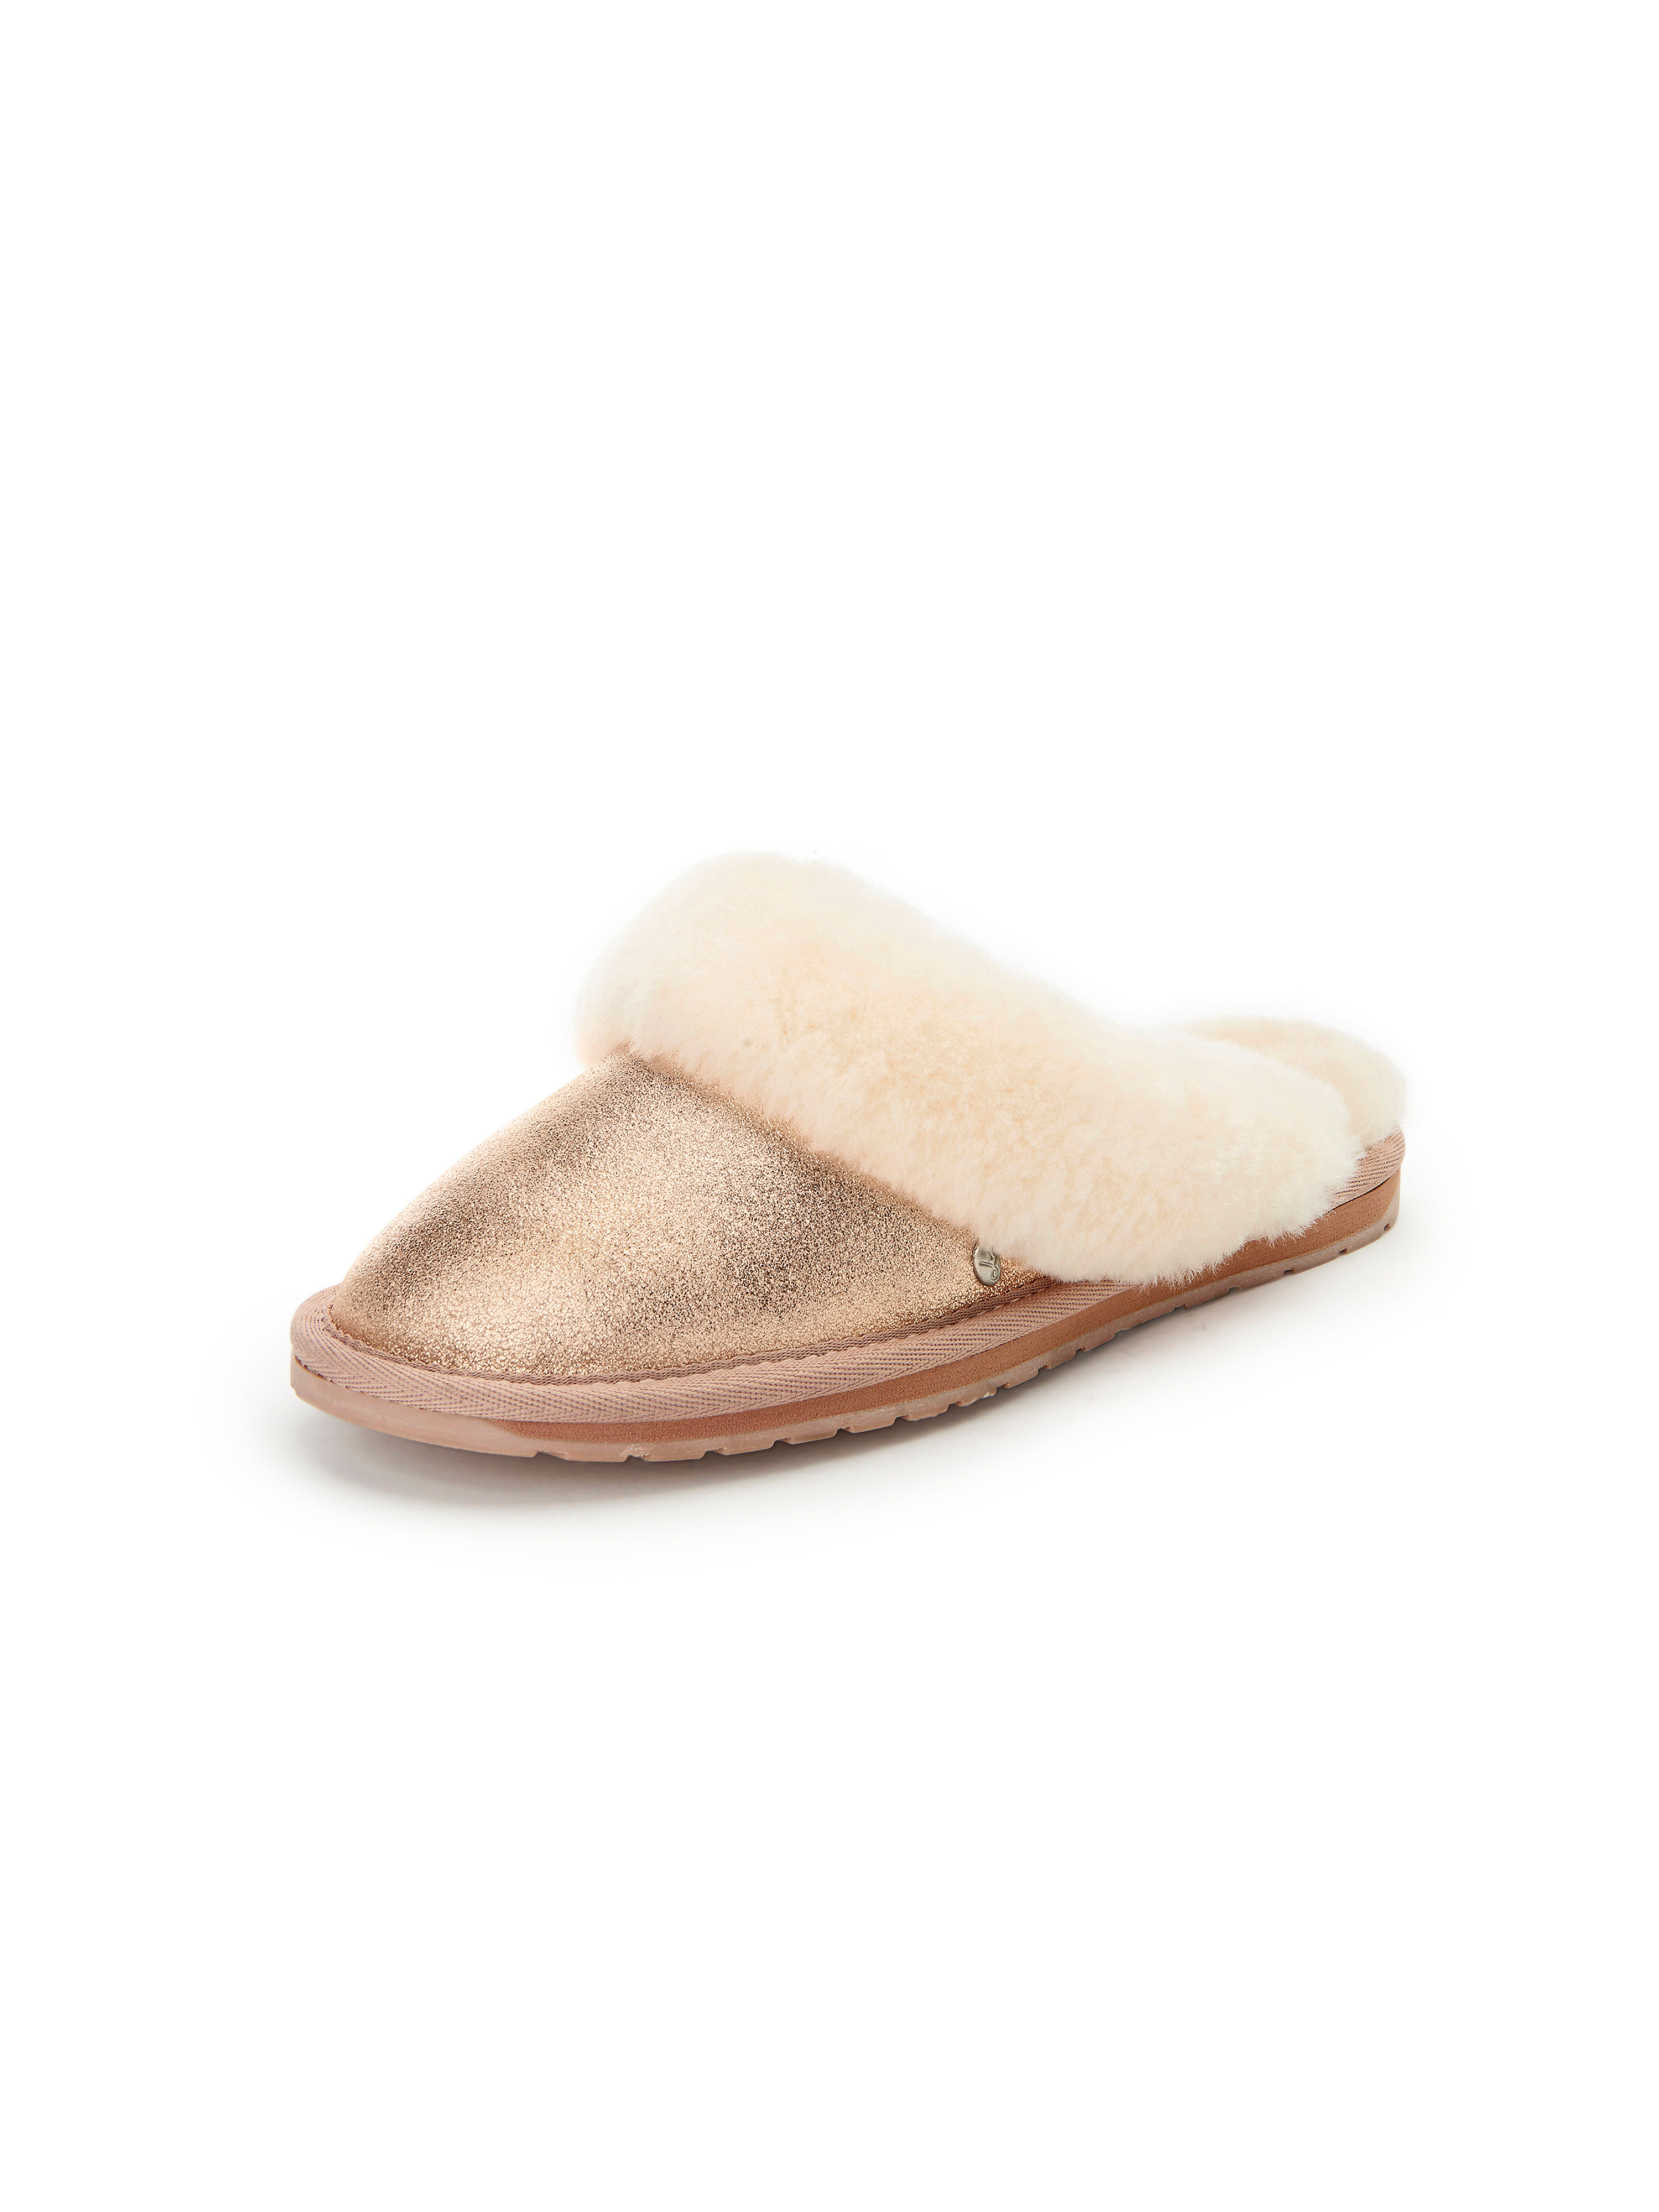 Emu - Slippers in 100% leather - rose gold metallic